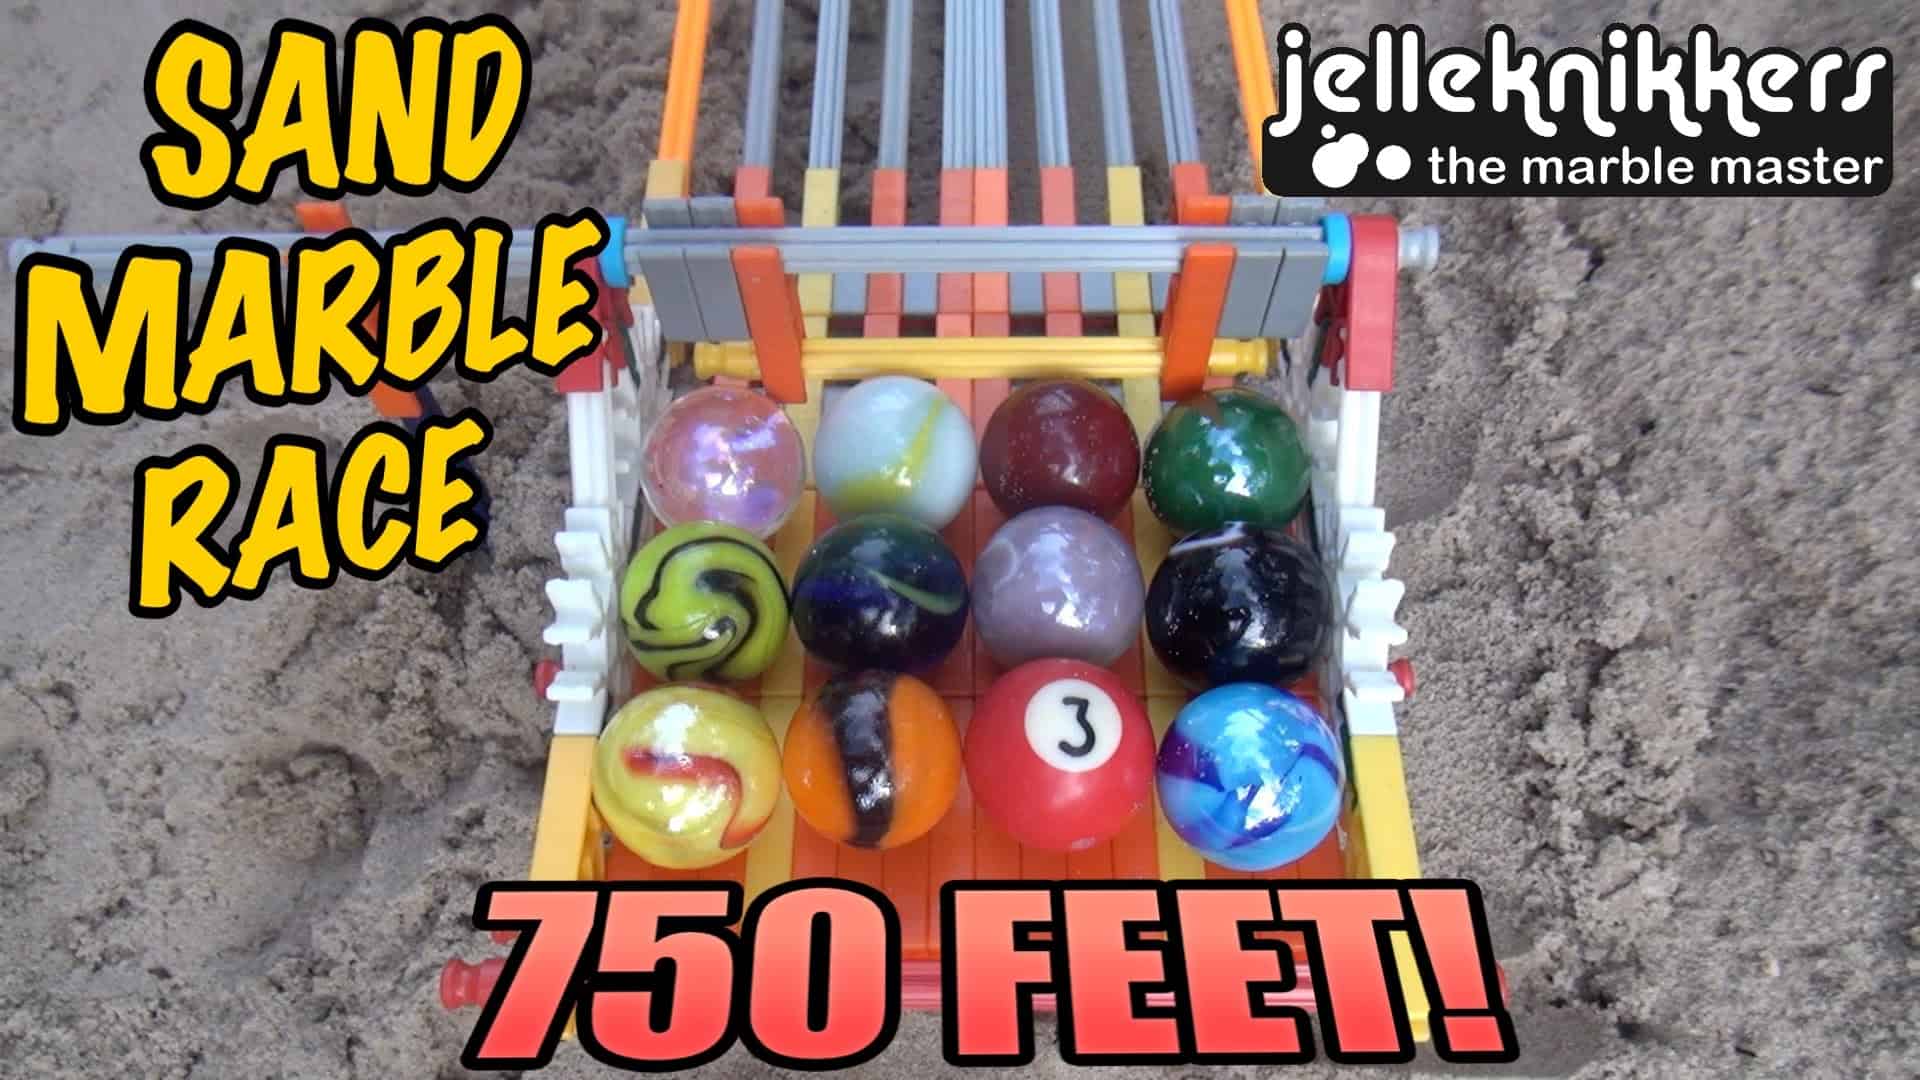 The longest marble race in the sand